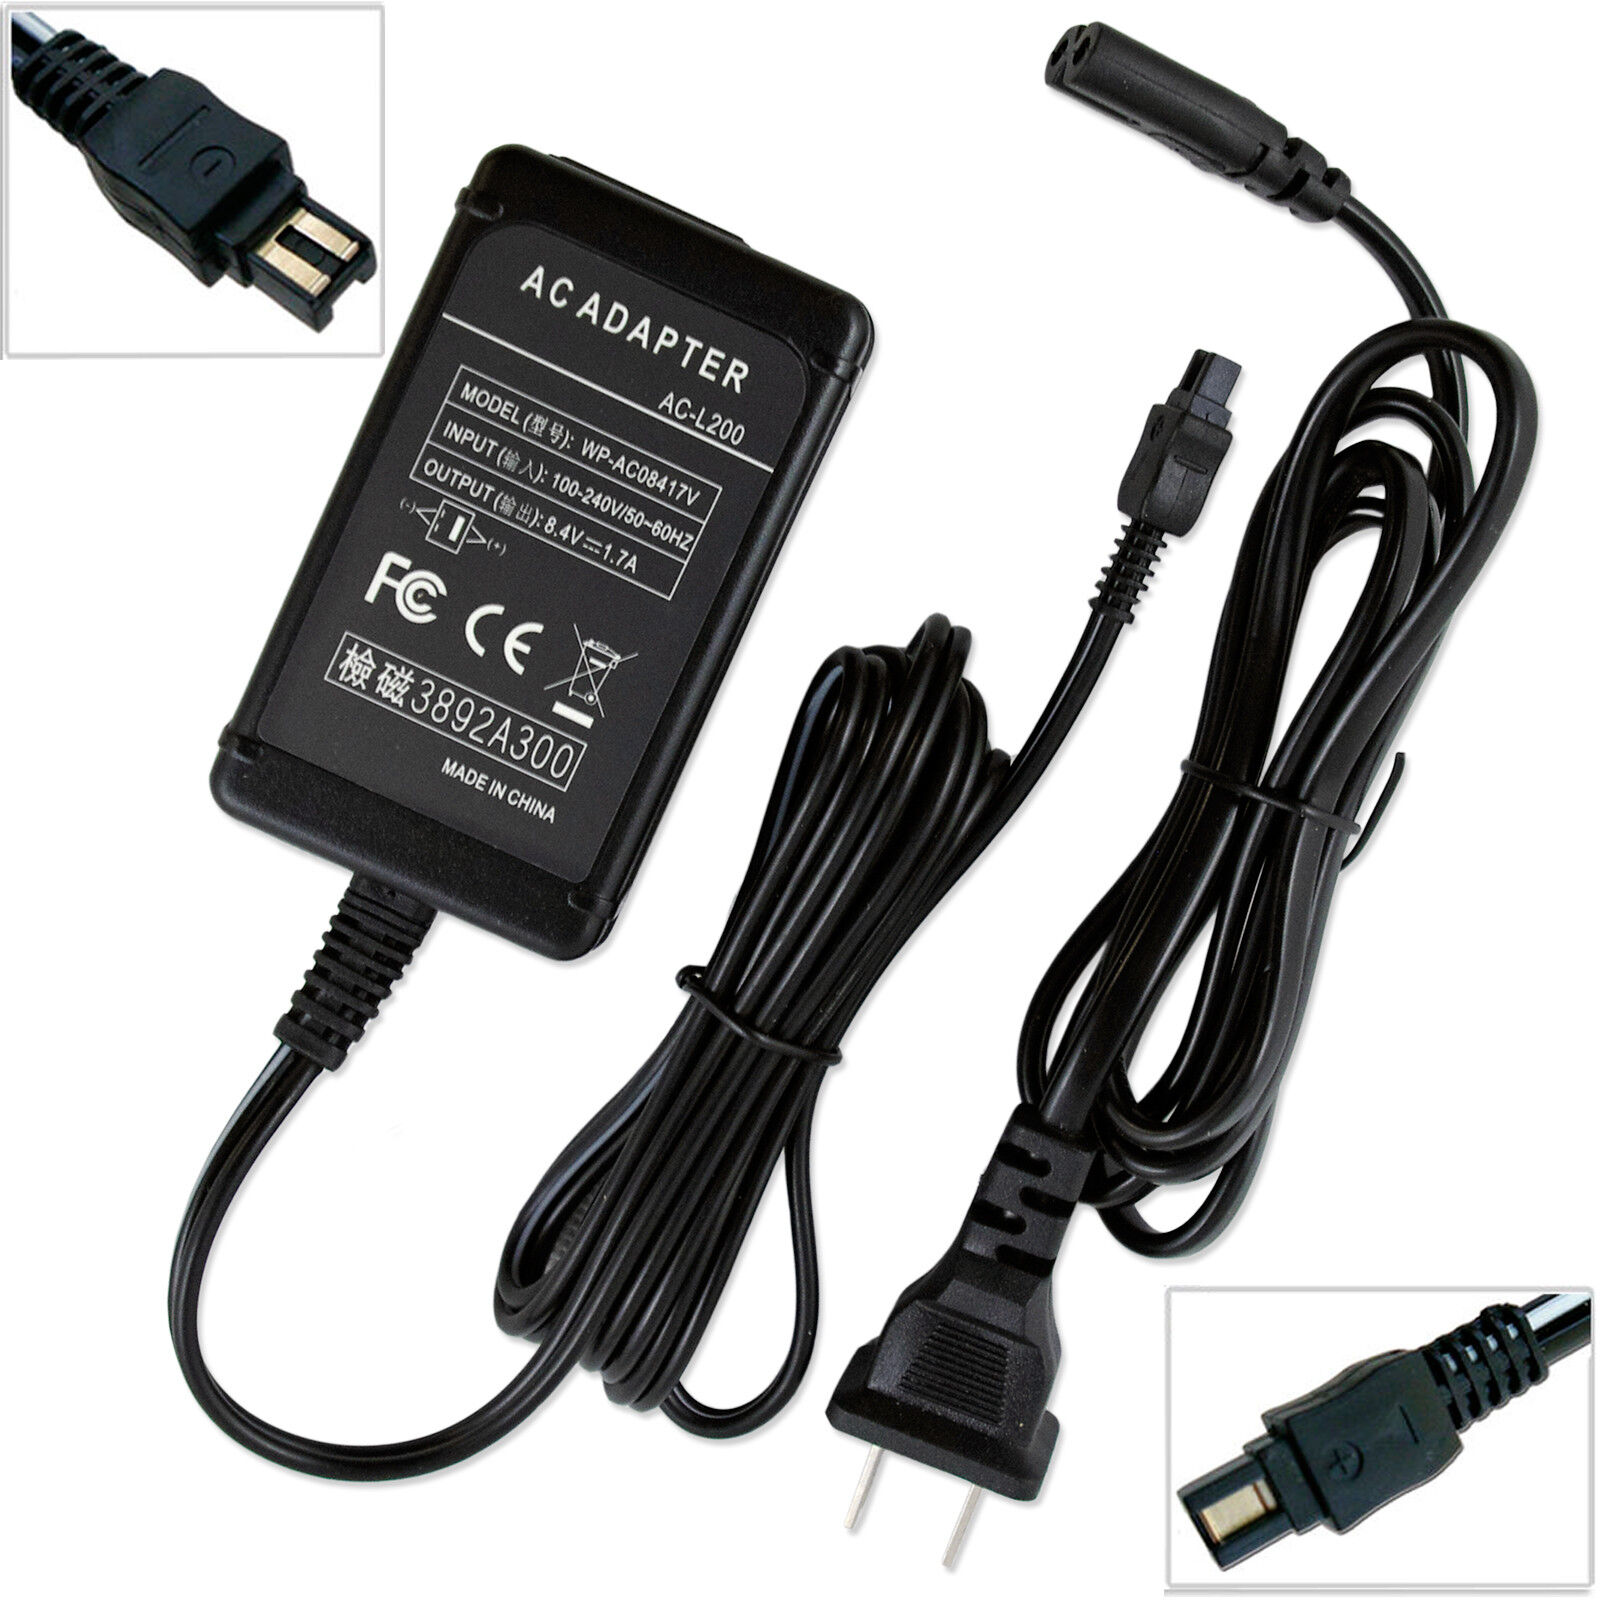 AC Adapter Battery Charger For Sony Camcorder HDR-SR5 E HDR-SR12 E Power Supply Compatible Brand For Sony MPN Does Not